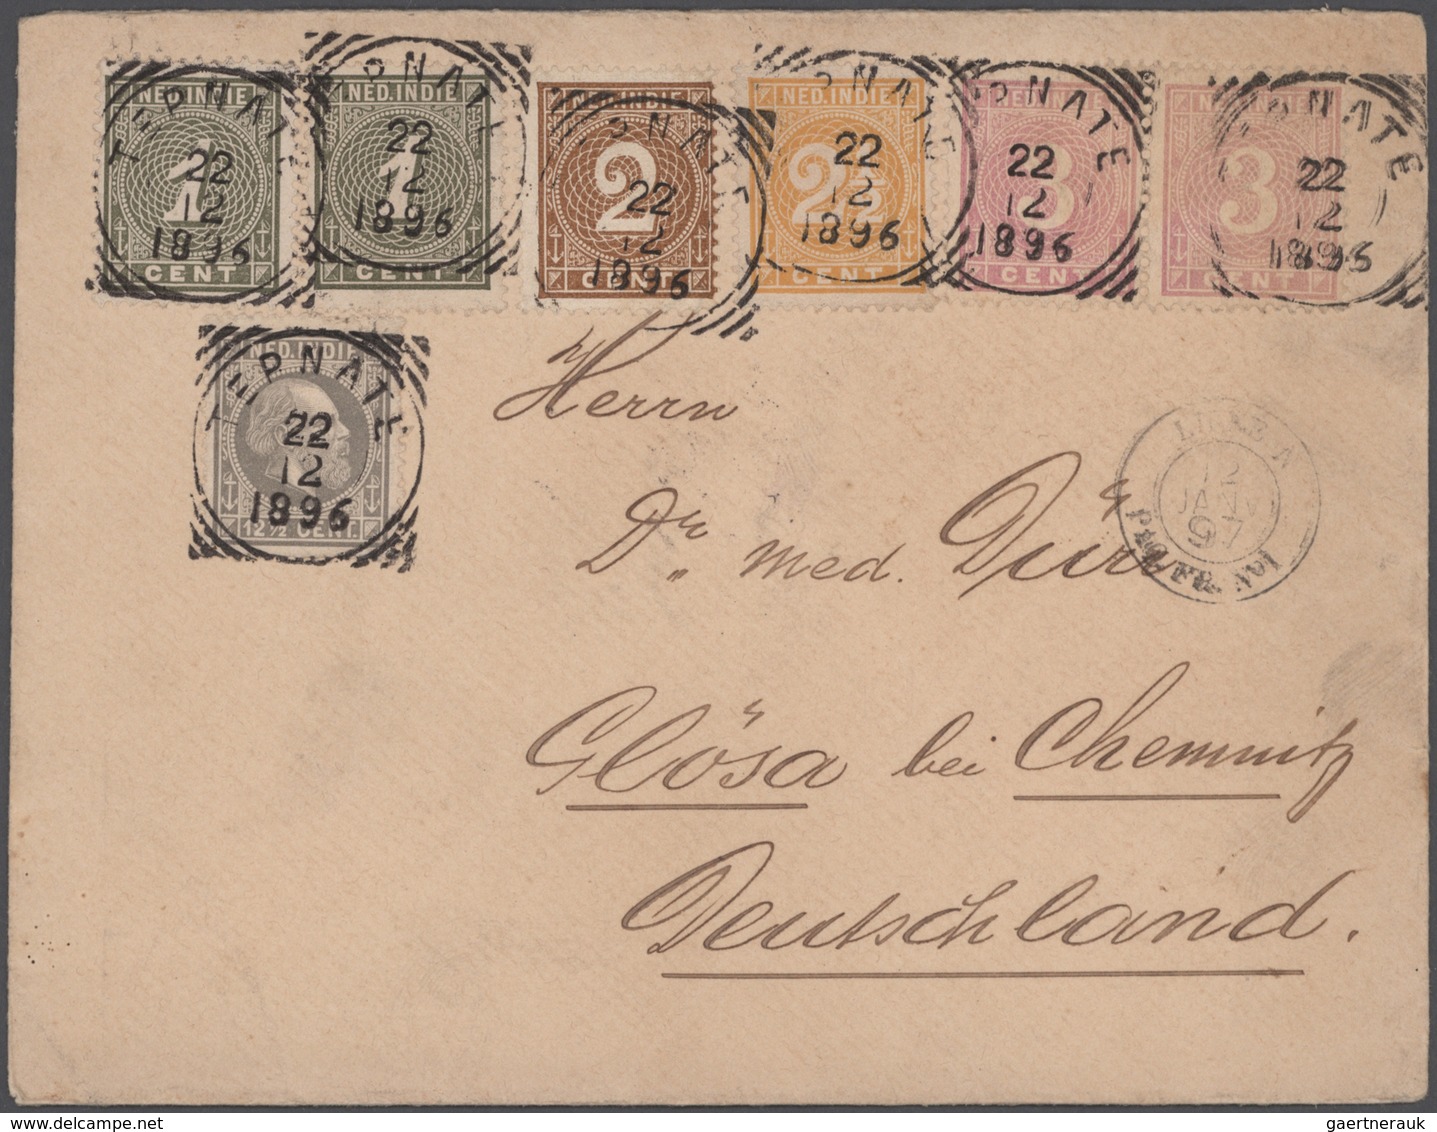 Asien: 1890/2000 (ca.), sophisticated balance of apprx. 260 covers/cards with many interesting piece